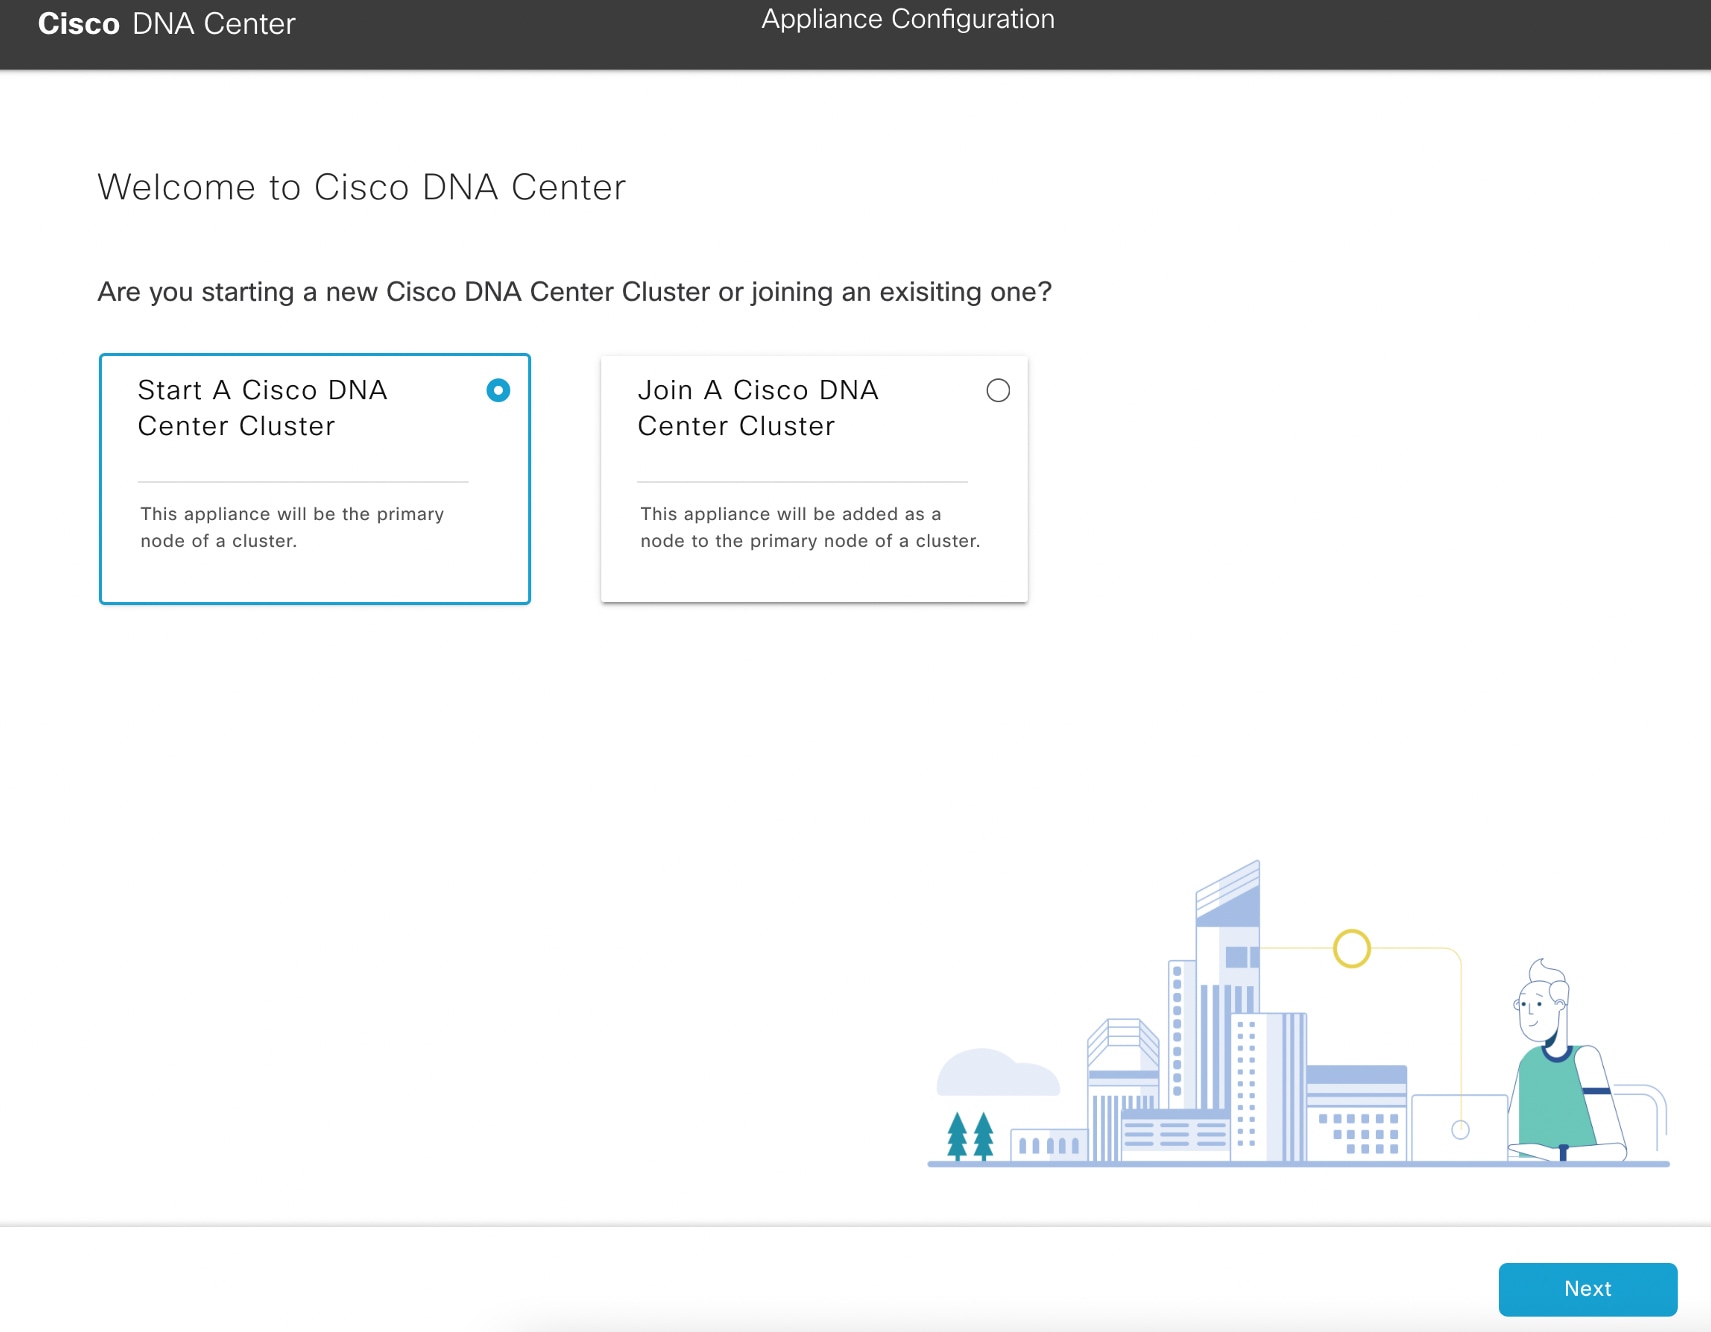 The Applicance Configuration screen displays two options: start or join a Cisco DNA Center cluster.